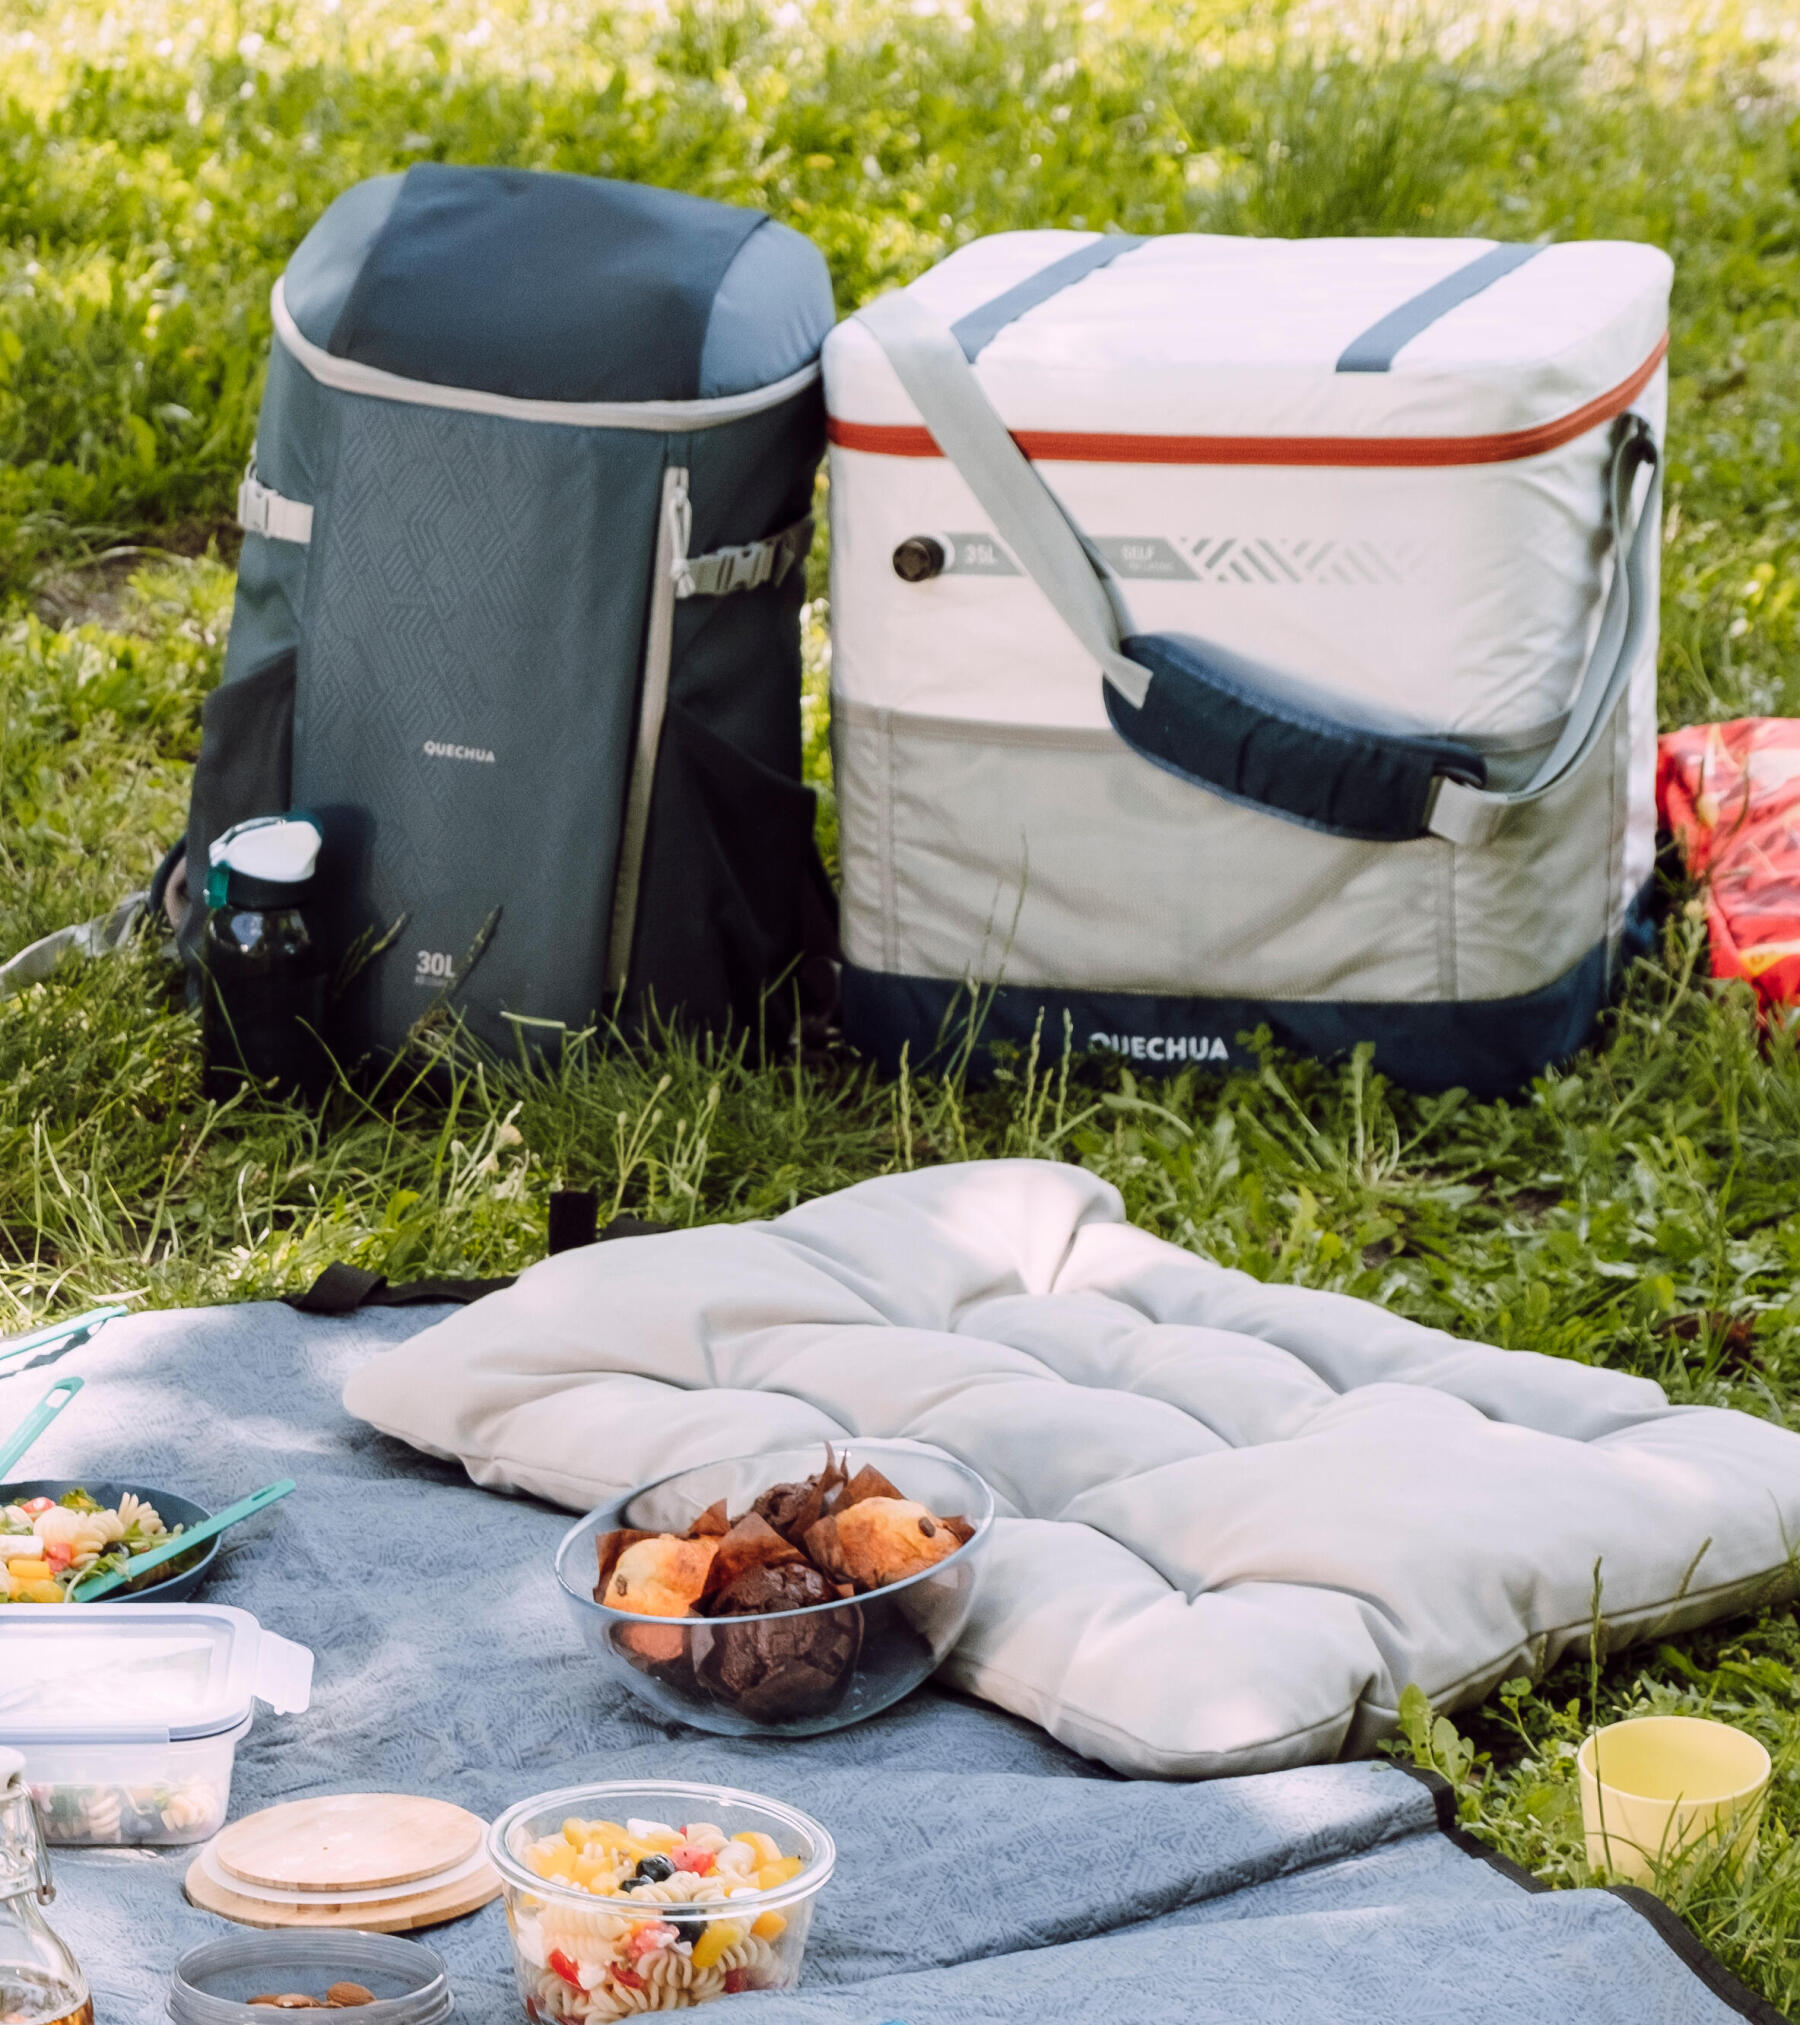 Tips for easy camp-site cooking